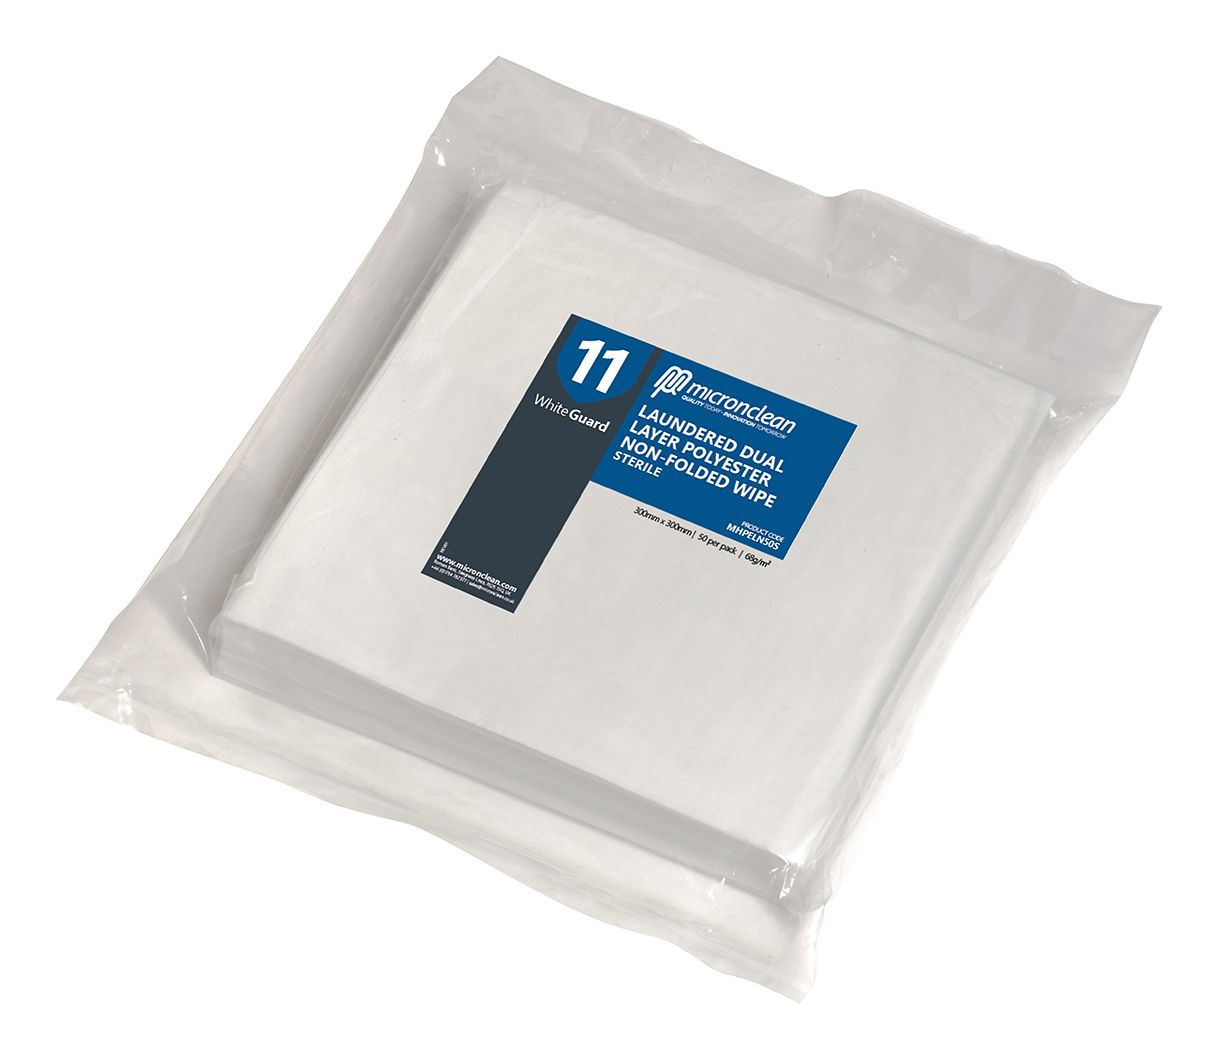 WhiteGuard 11 - Laundered Dual Layer Polyester Wipes - Sterile [EU]